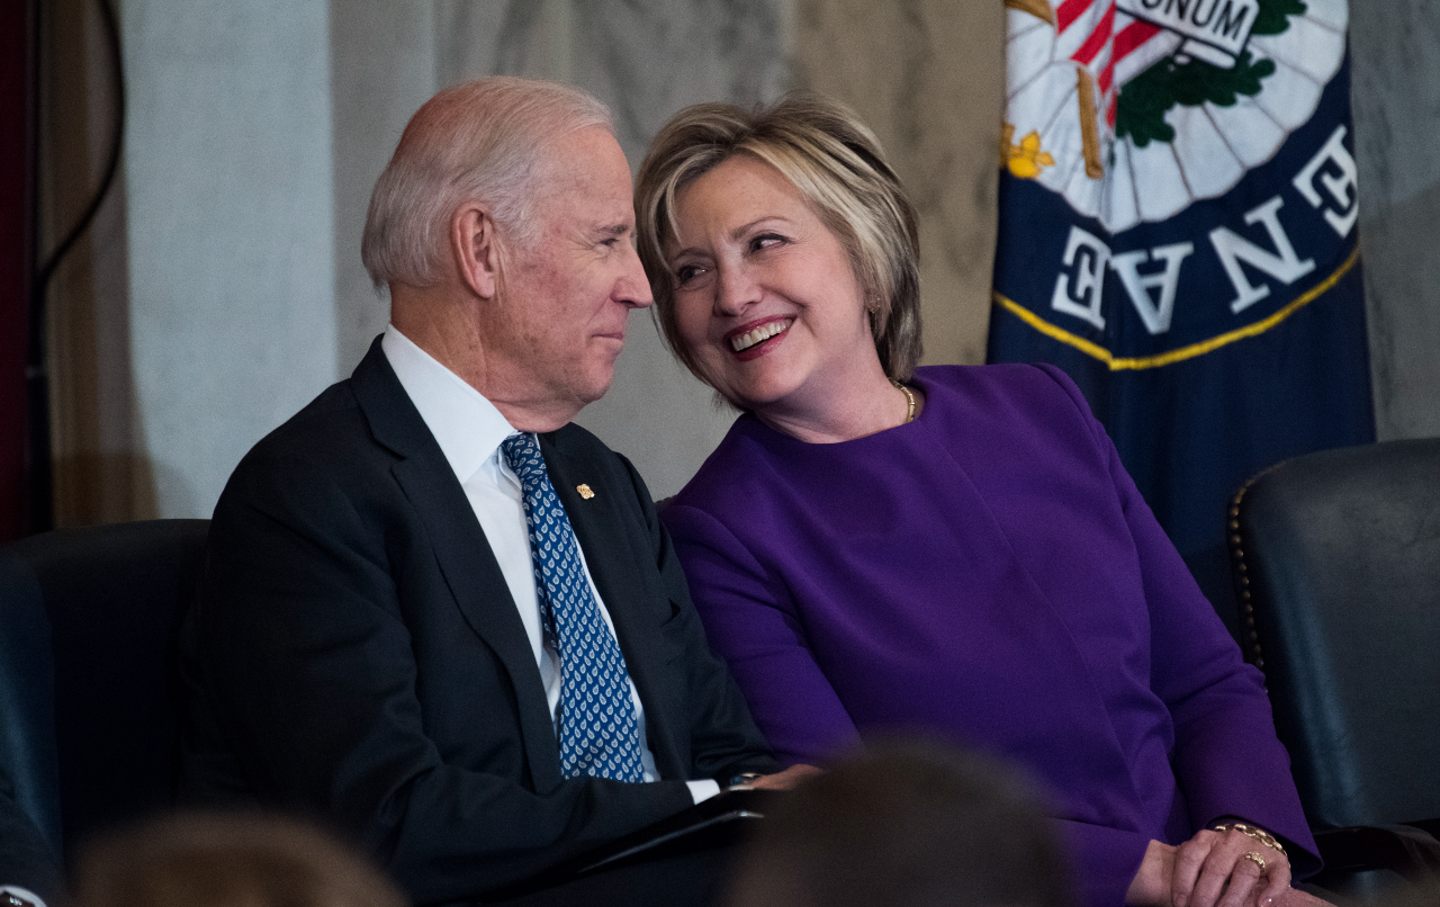 Joe Biden and Hillary Clinton attend a portrait unveiling ceremony in the Russell Senate Office Building on December 8, 2016.